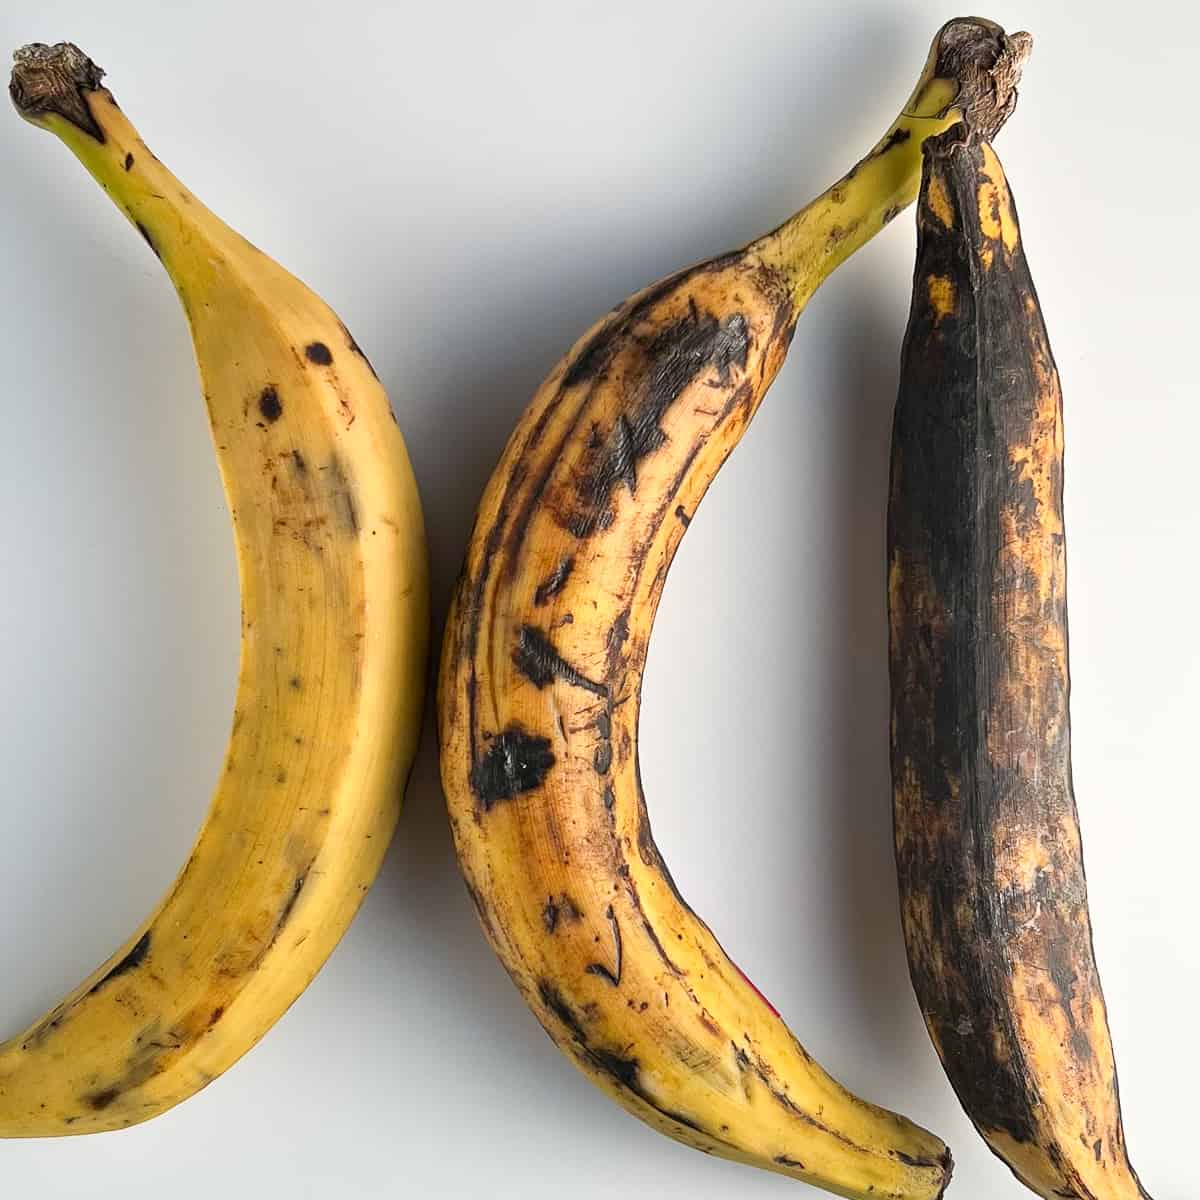 top view of three plantains of varying degrees of ripeness against a white surface